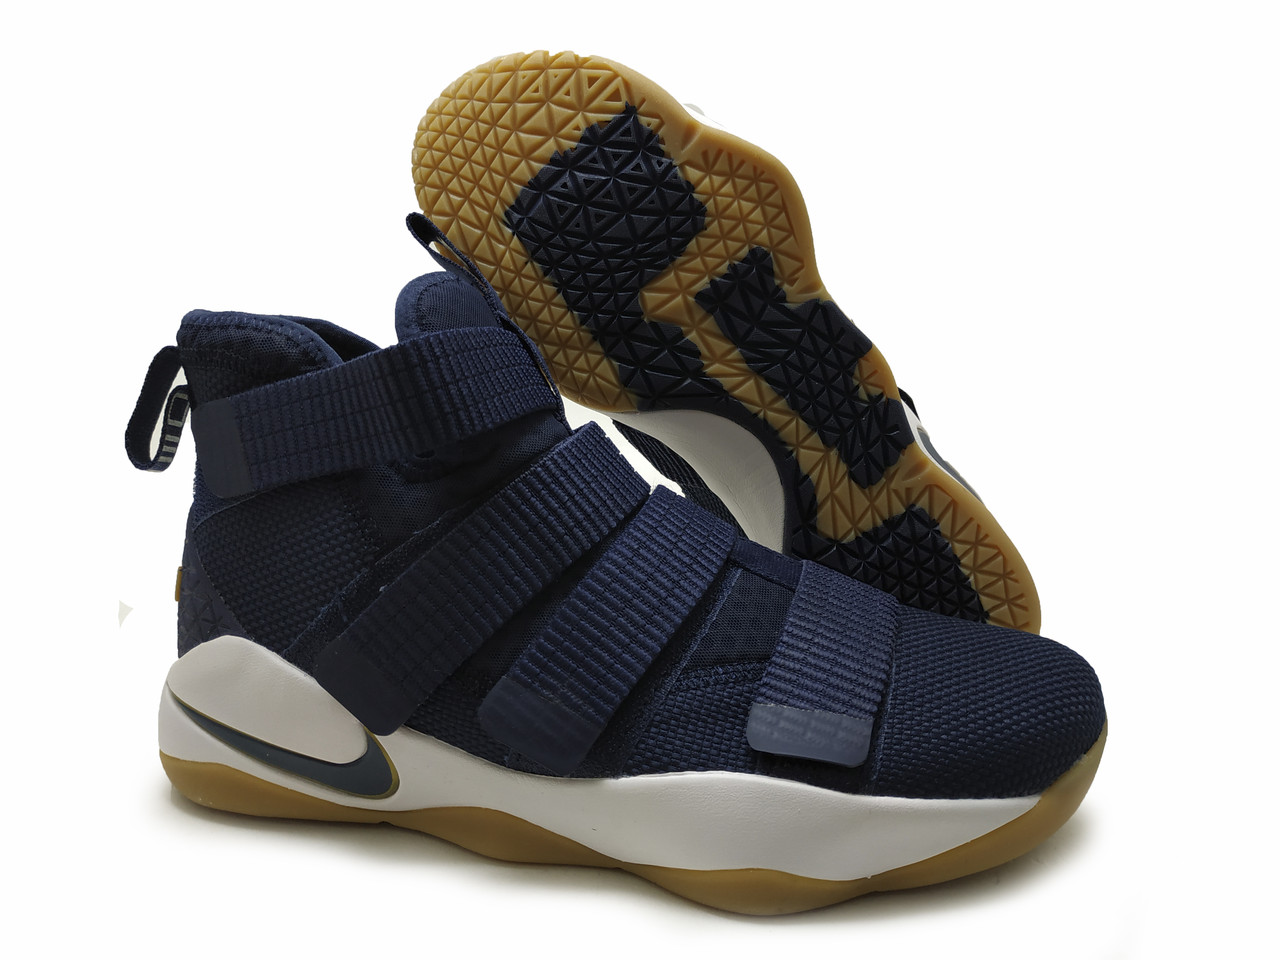 lebron soldier 11 id